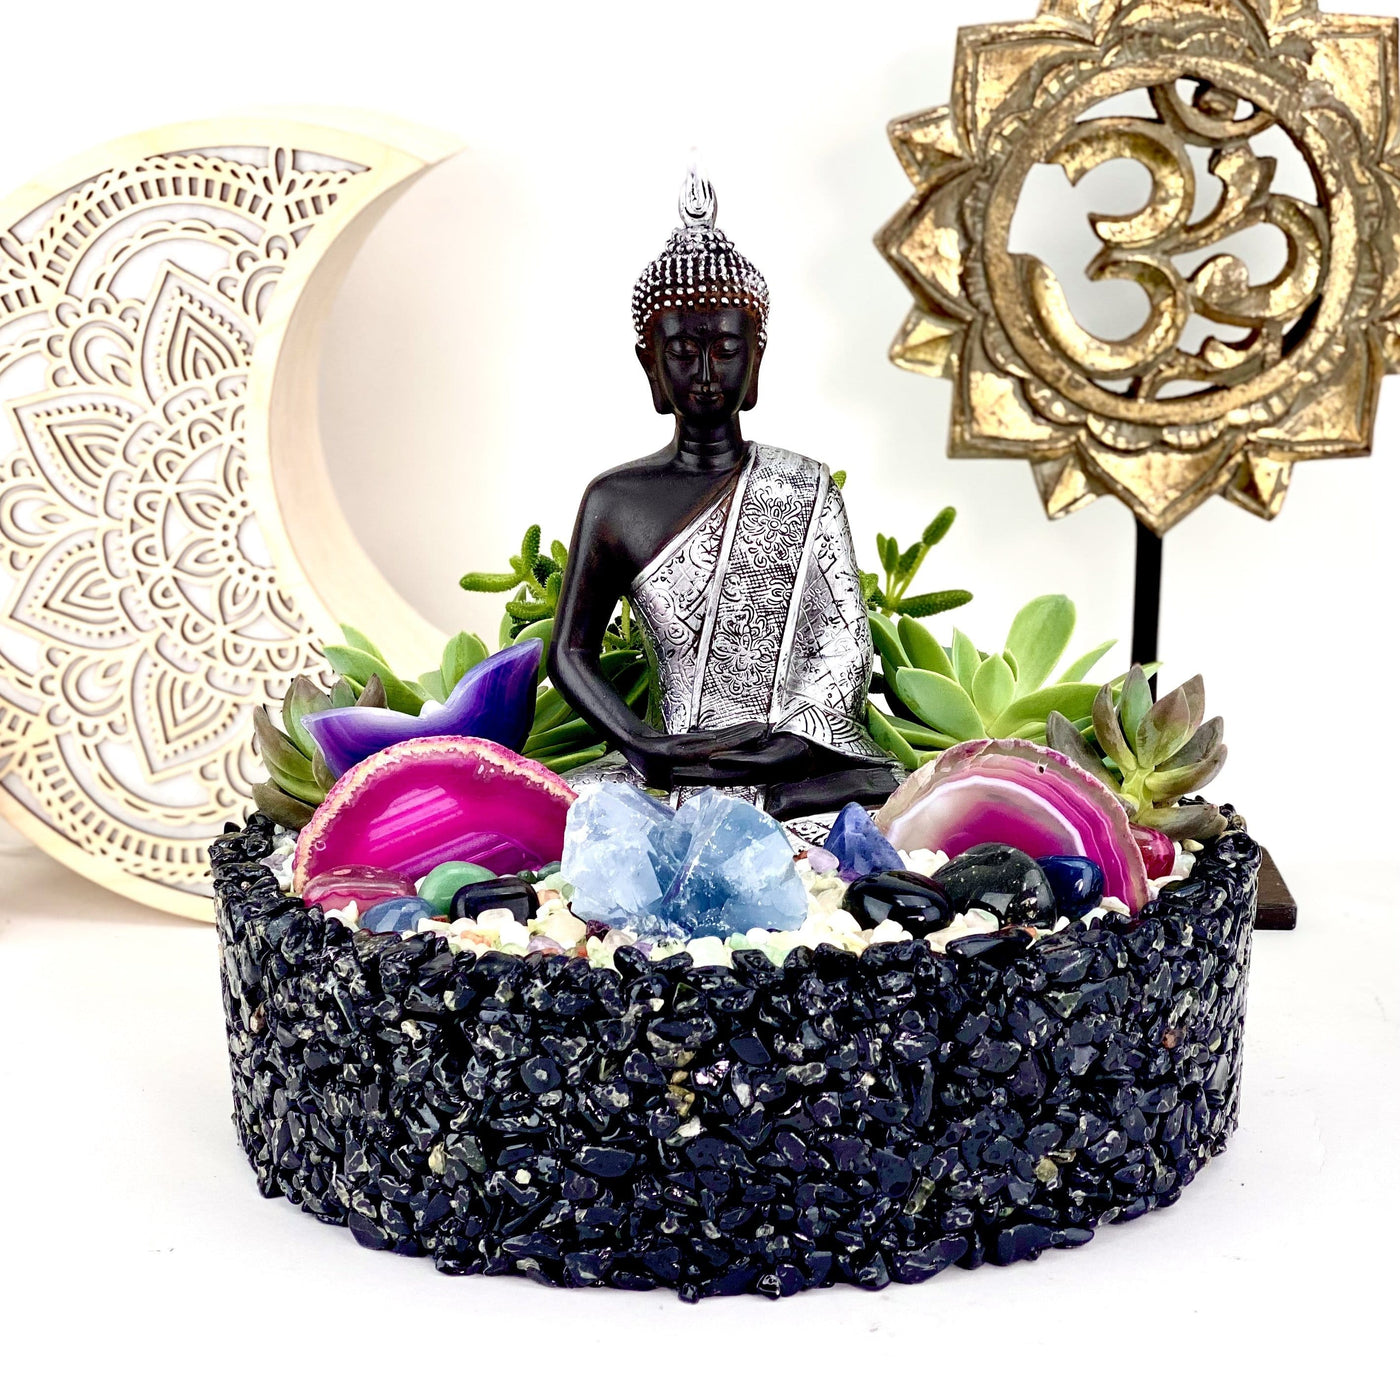 Tumbled Stone Bowl  with buddah and plants in it